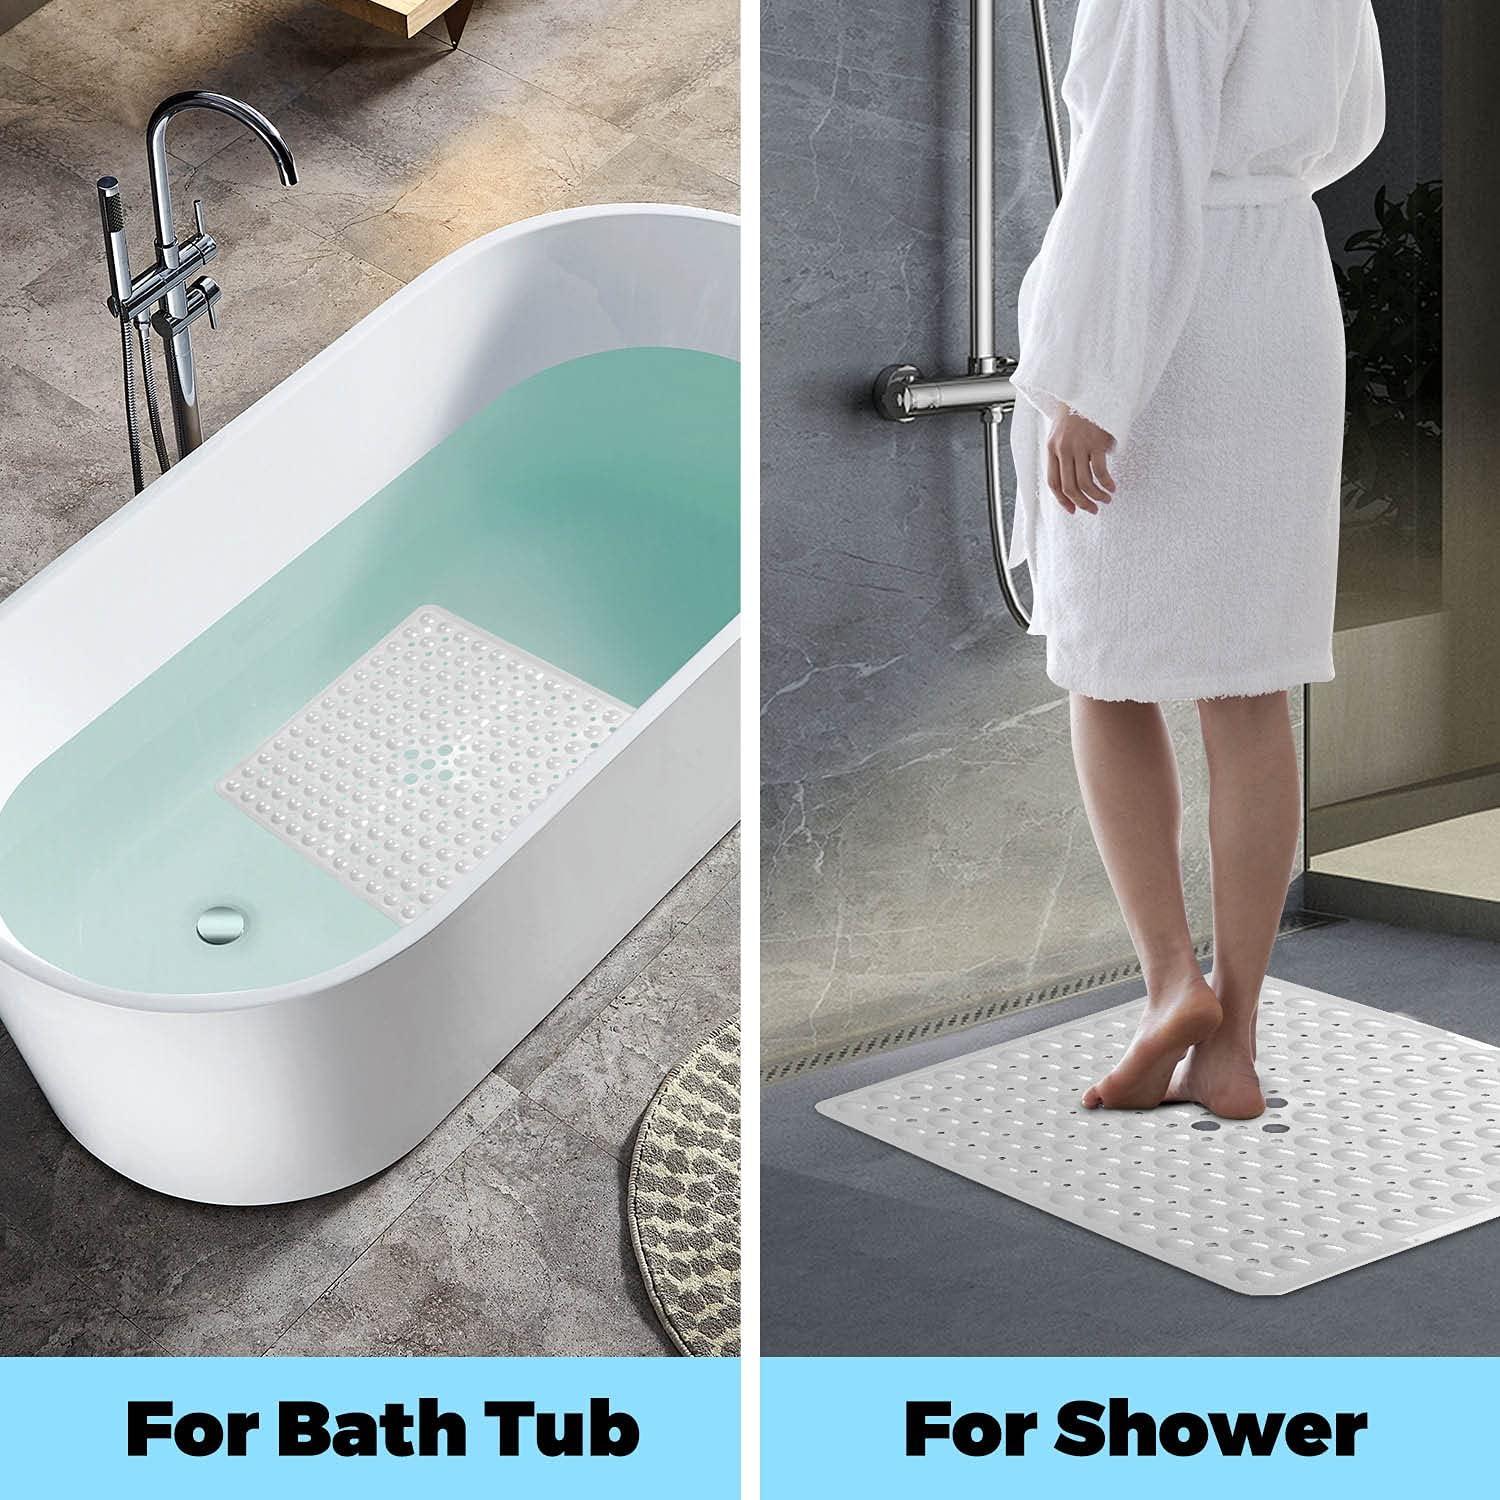 YINENN Shower Mat Square Bathroom Mats 21 x 21 inches with Suction Cups and  Drain Holes, Non Slip and Washable for Showers (White)